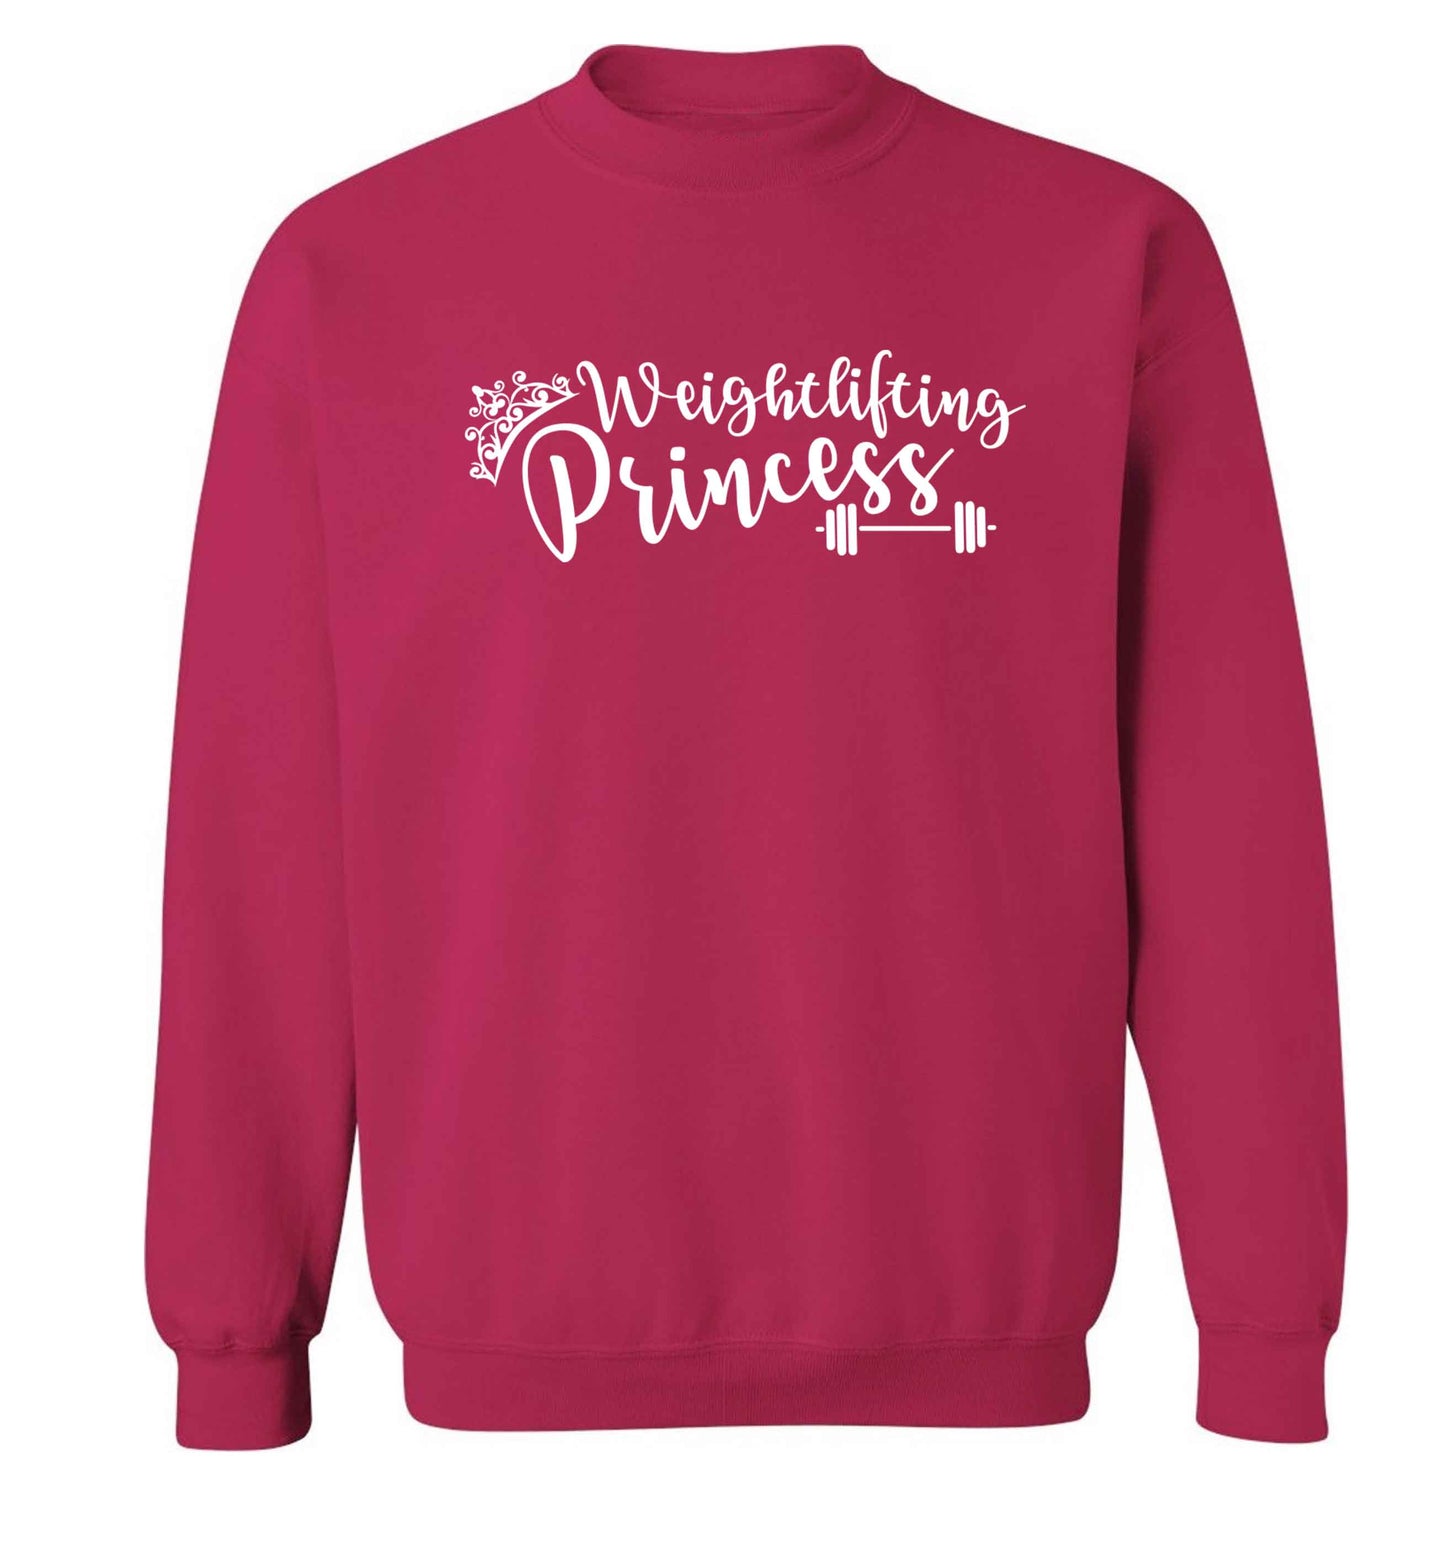 Weightlifting princess Adult's unisex pink Sweater 2XL